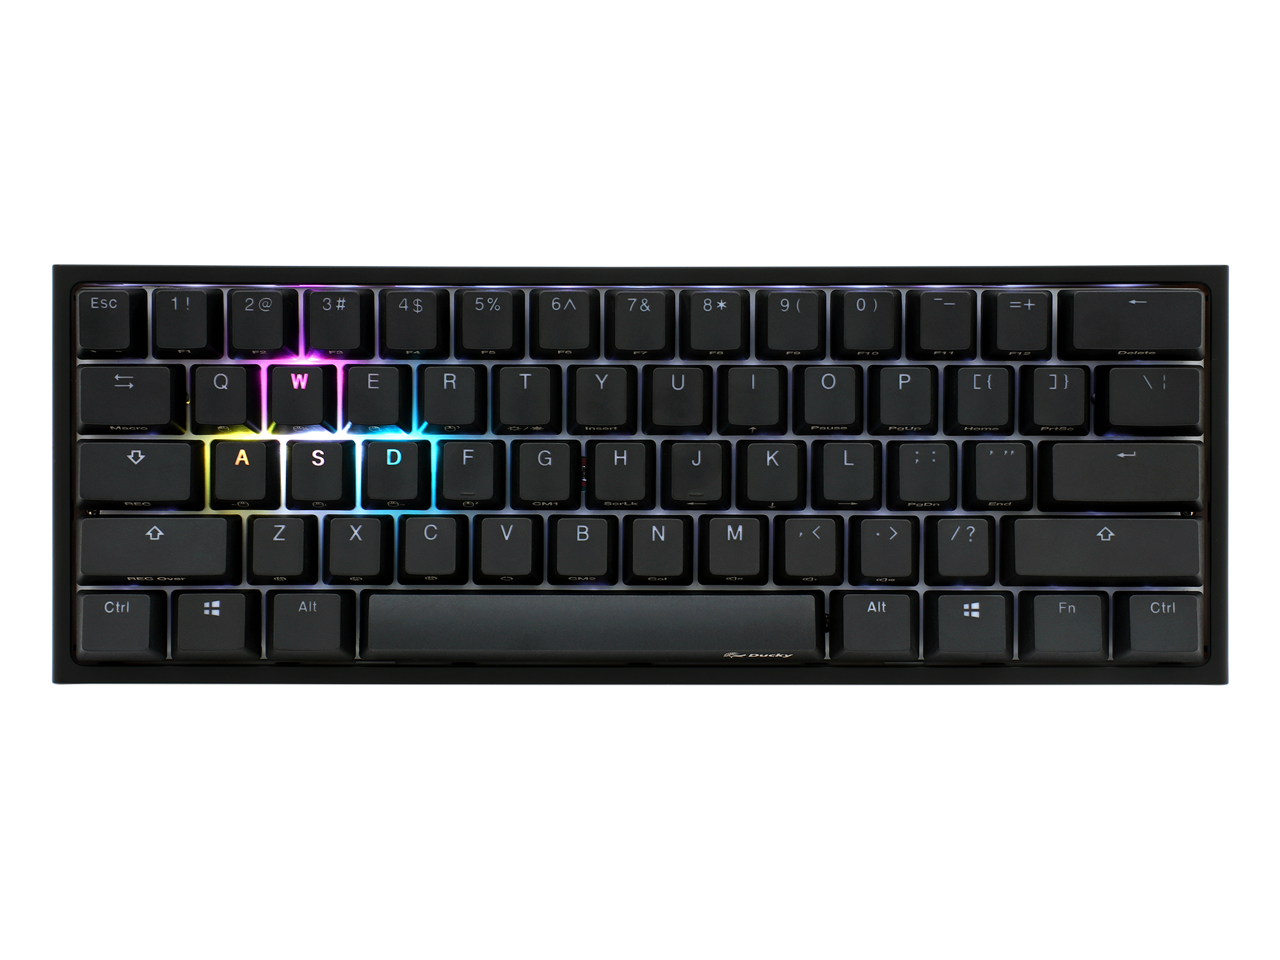 Ducky One 2 Mini Rgb Led 60 Double Shot Pbt Gaming Mechanical Keyboard Cherry Mx Blue Bezel Design Detachable Usb Type C Lightweight And Extremely Portable Newegg Com